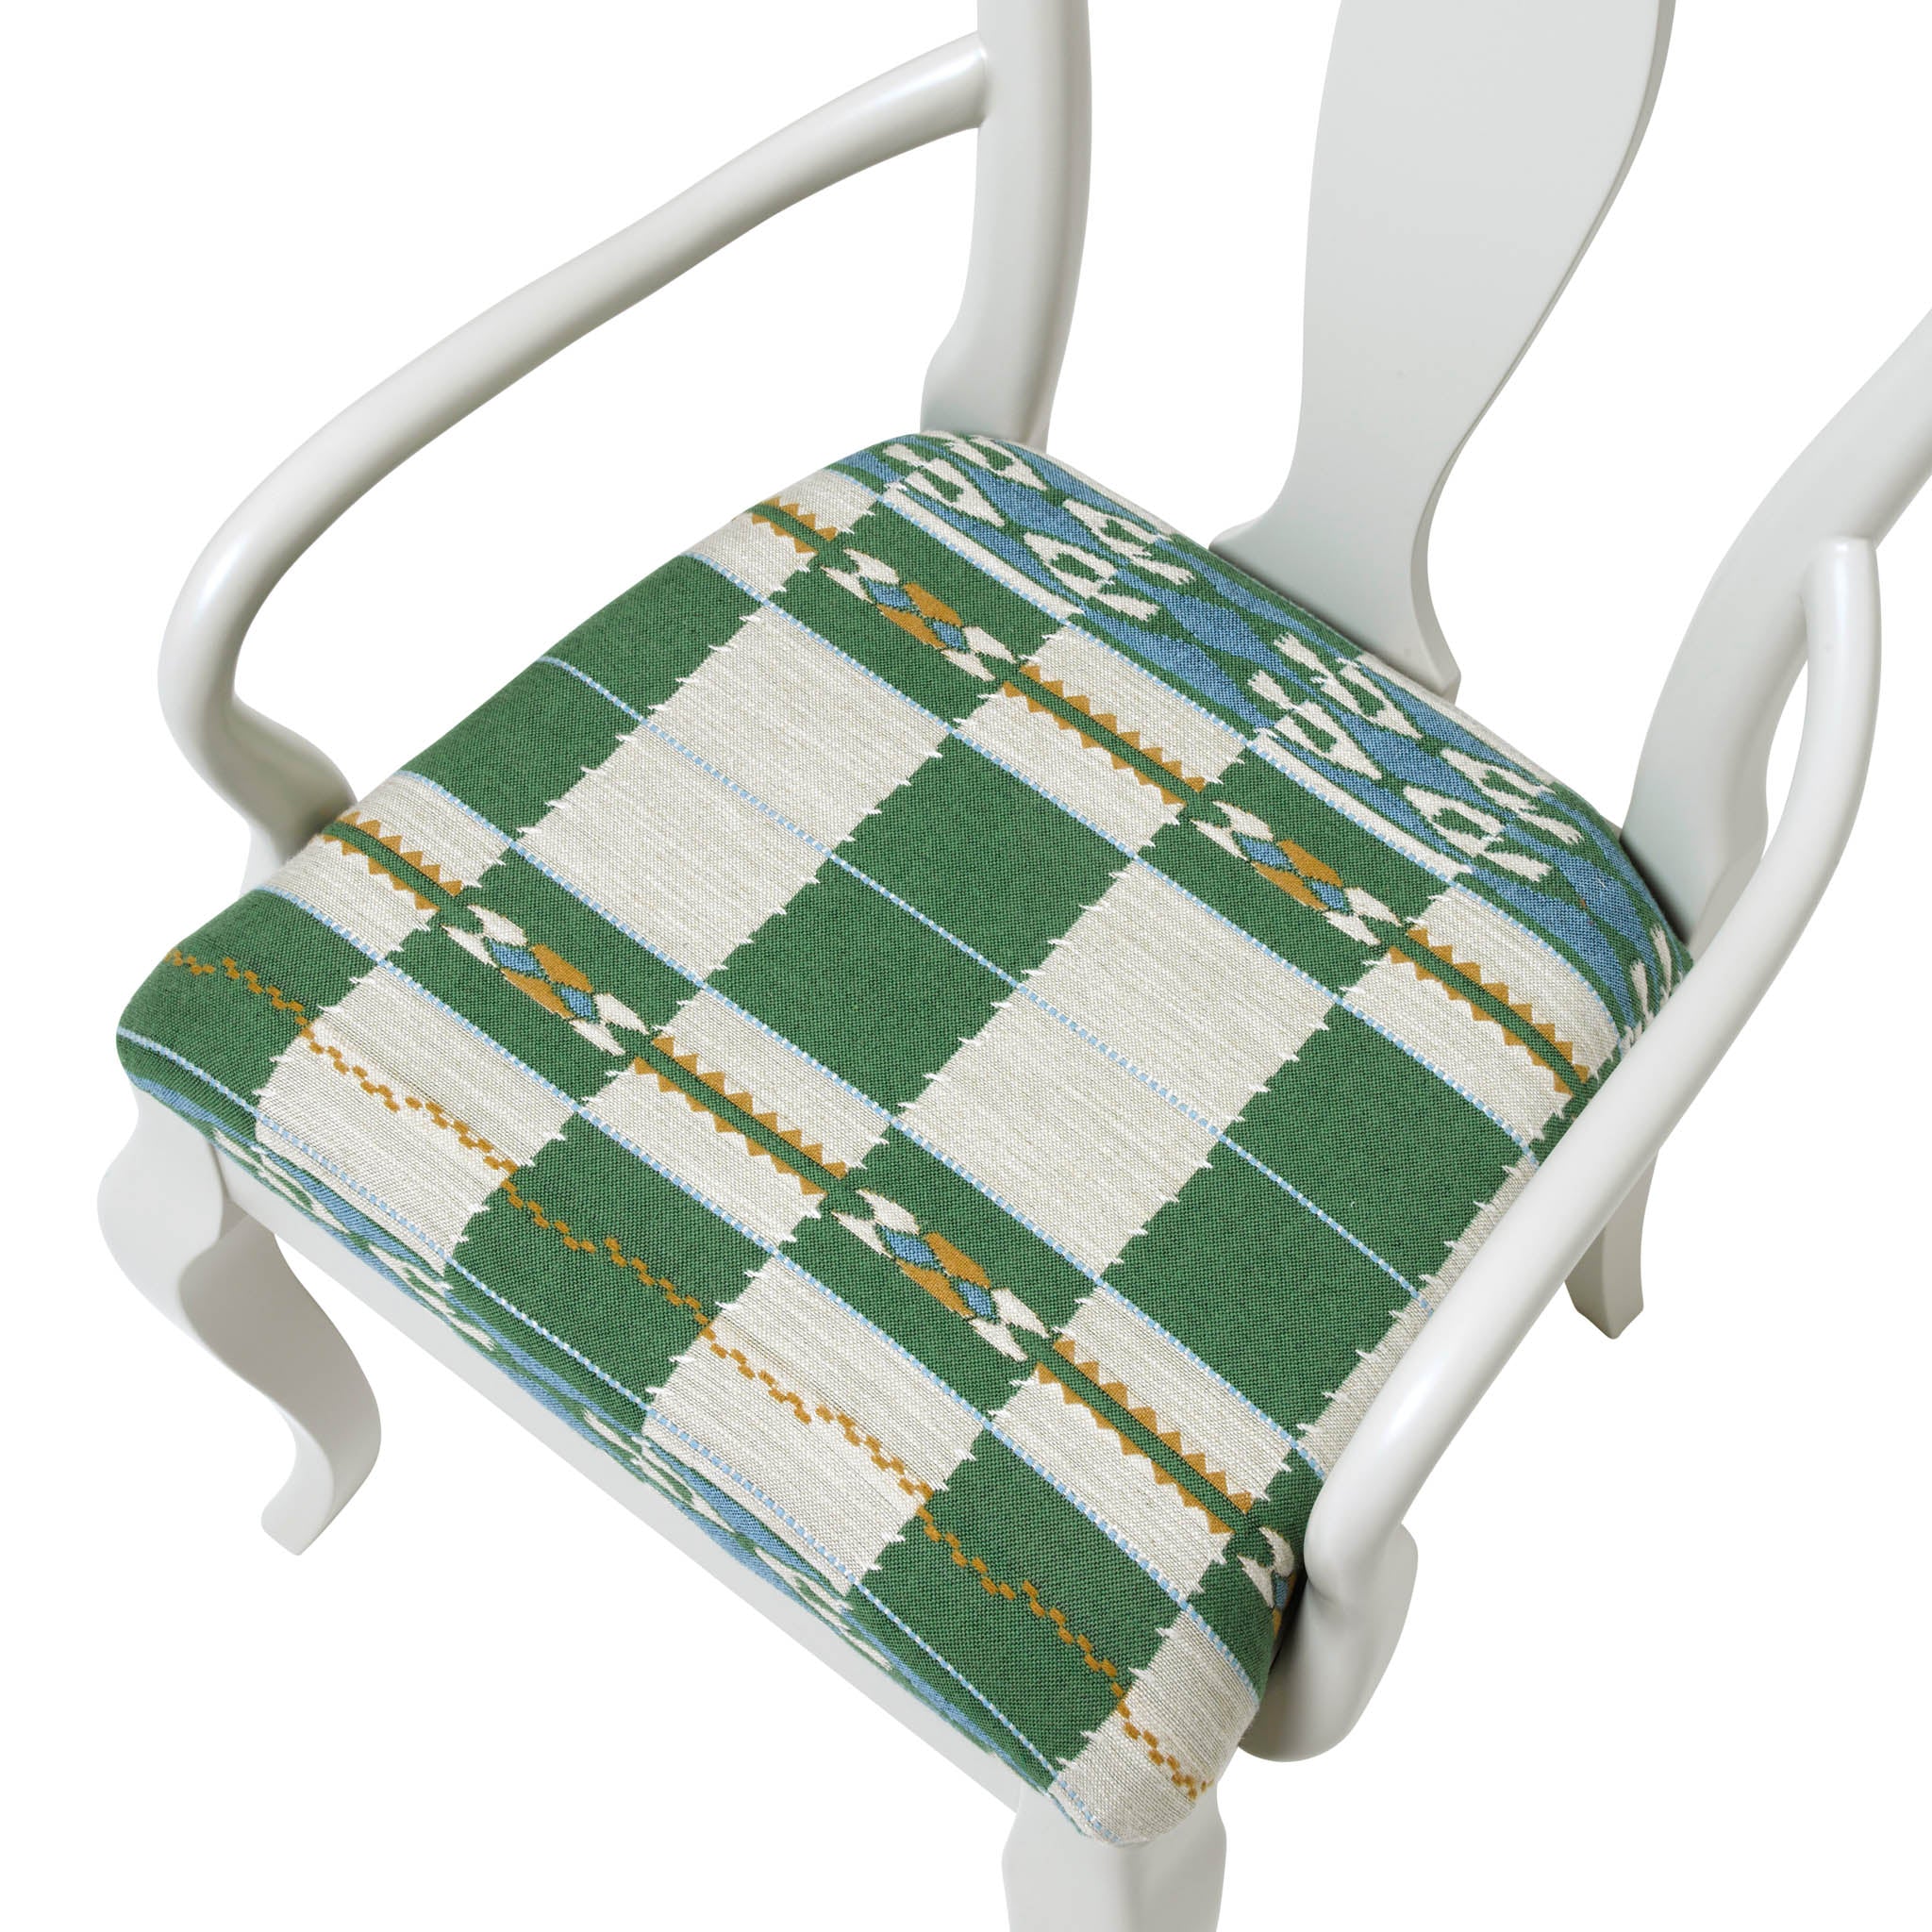 Marco Chair Upholstered in Chubby Check by Kit Kemp